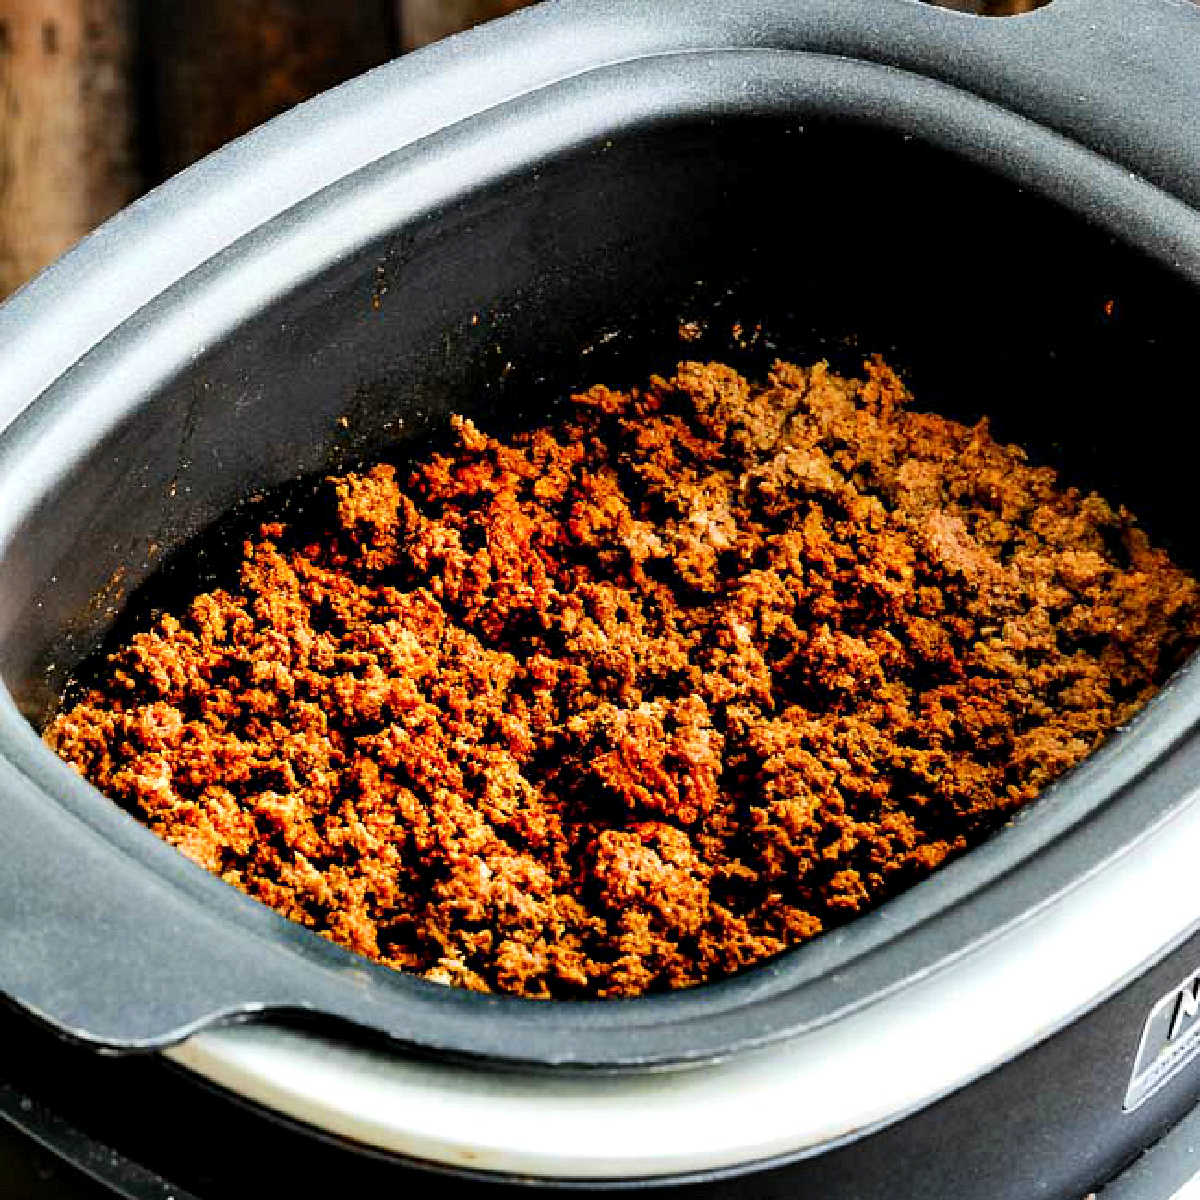 Square image of Slow Cooker Taco Meat with cooked meat shown in slow cooker.